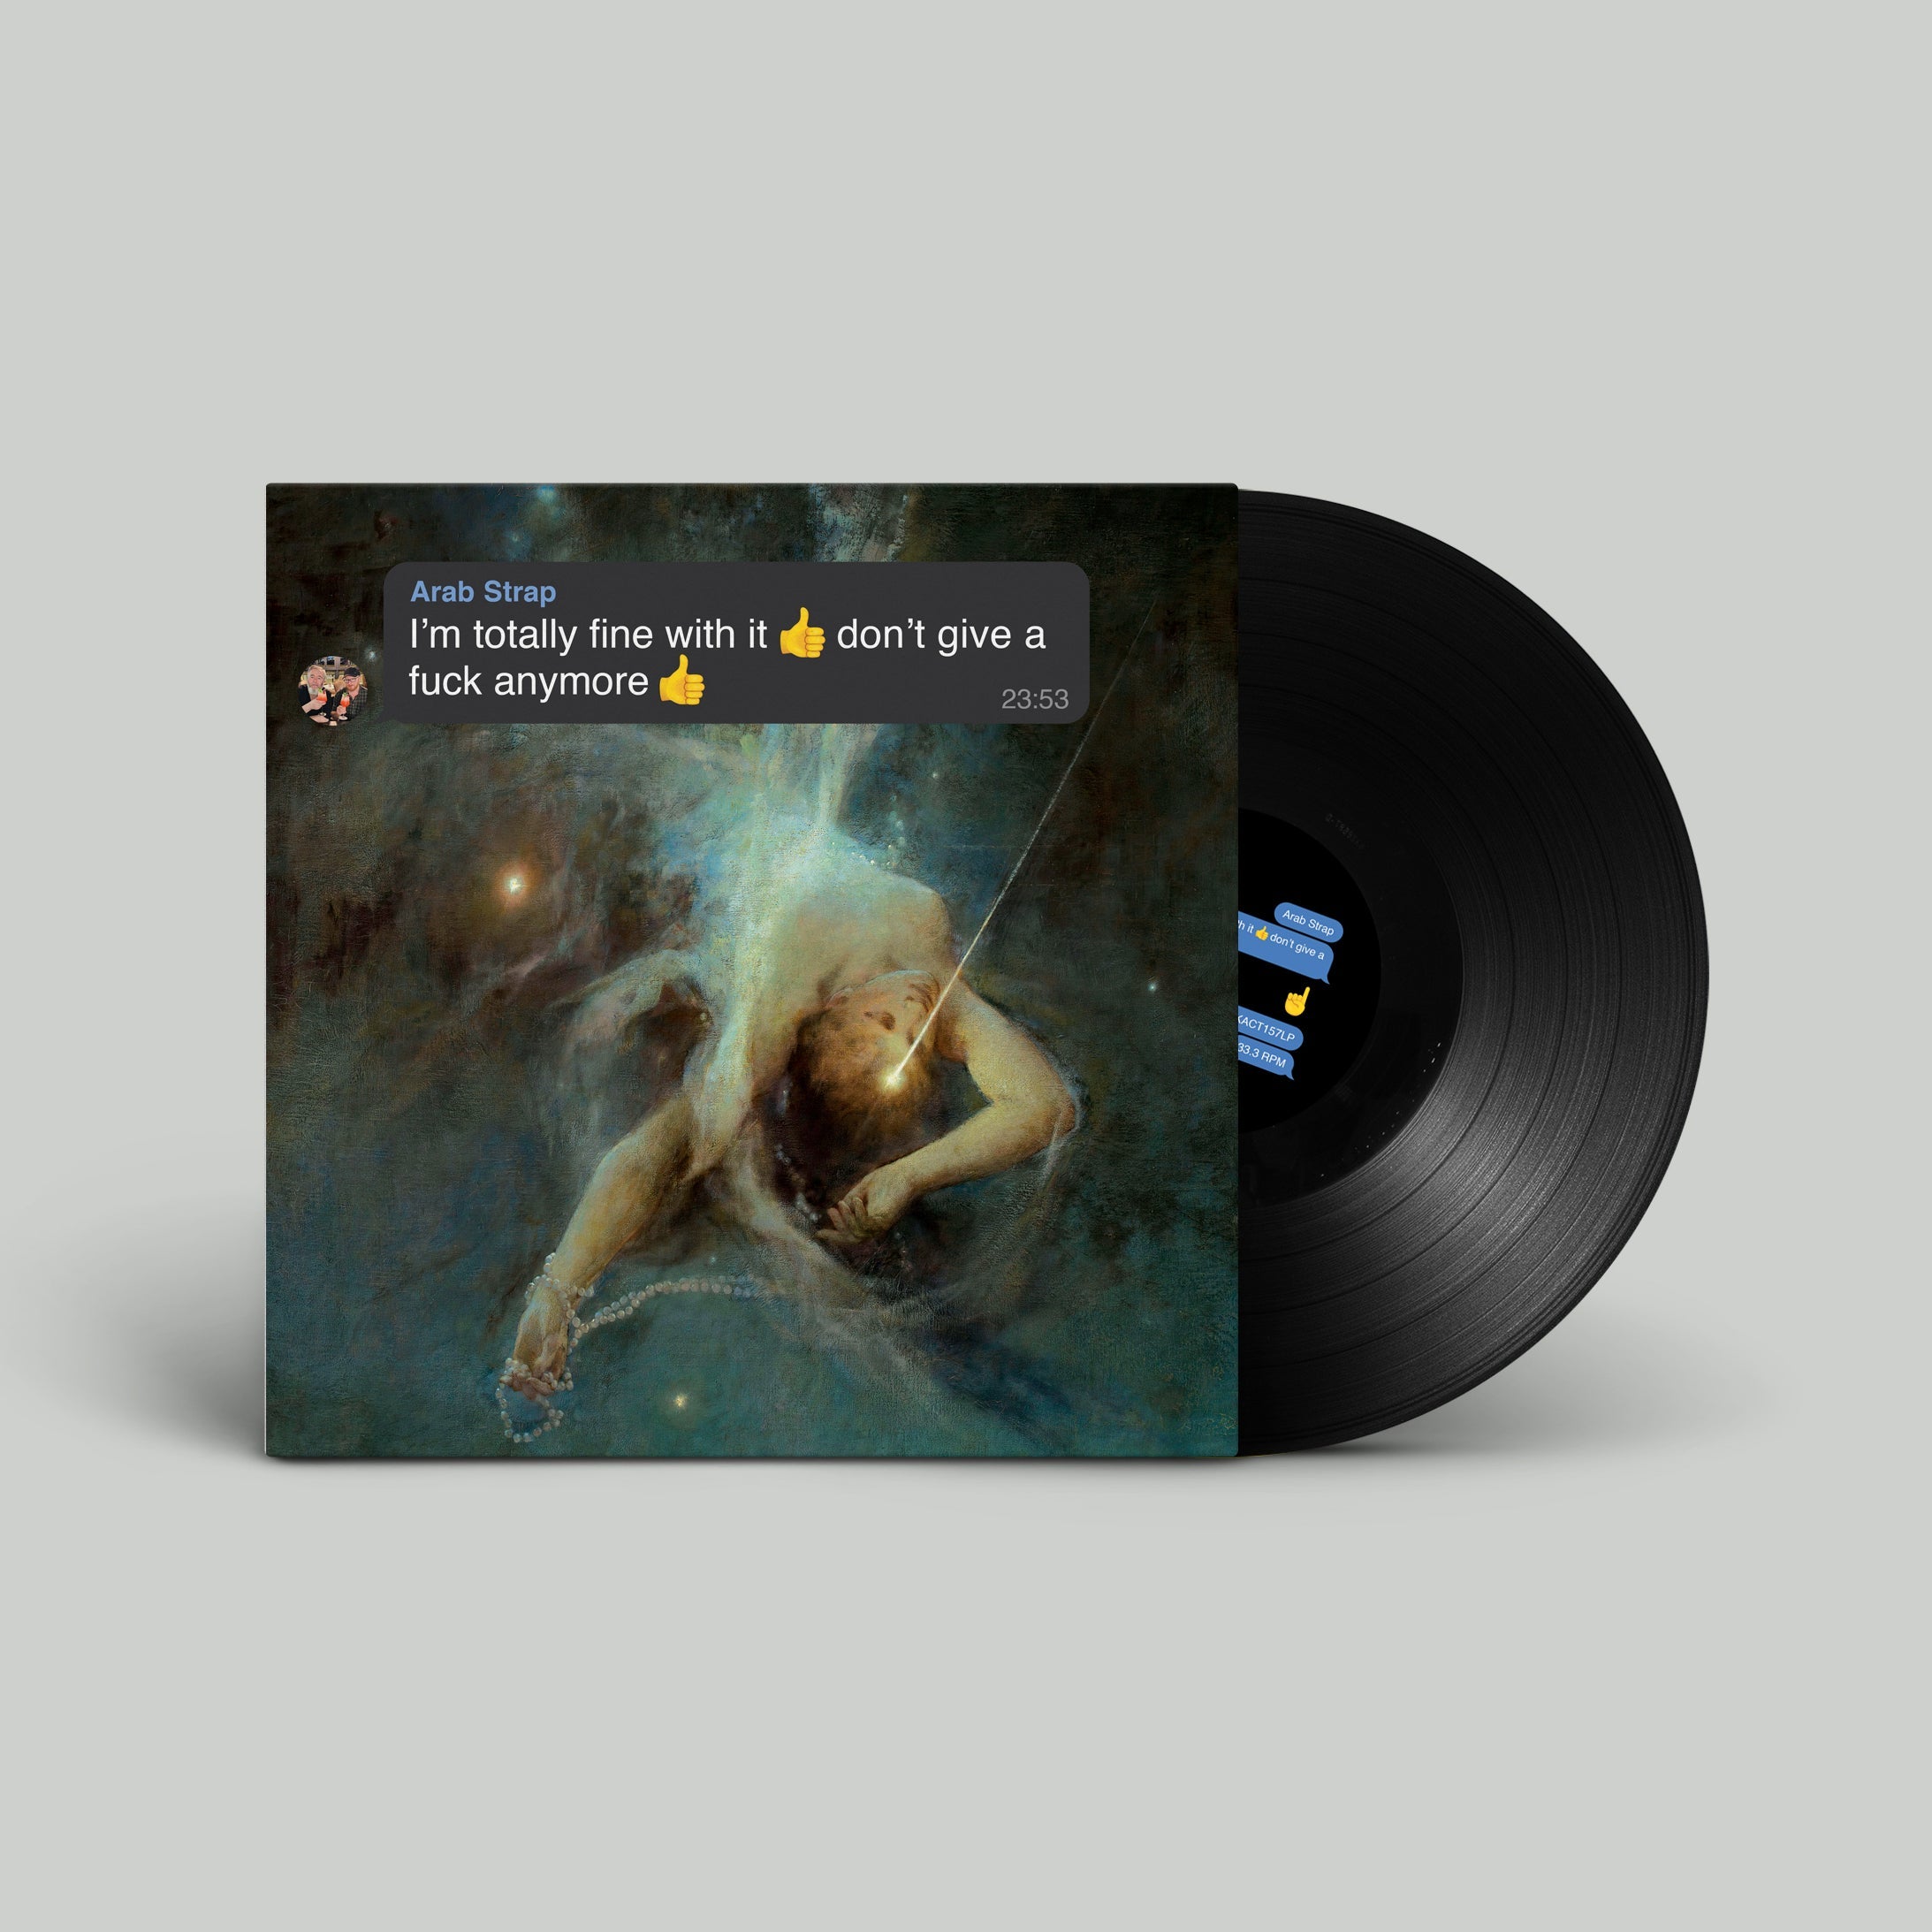 I’m totally fine with it 👍don’t give a fuck anymore 👍: Vinyl LP + Signed Double-Sided Art Card